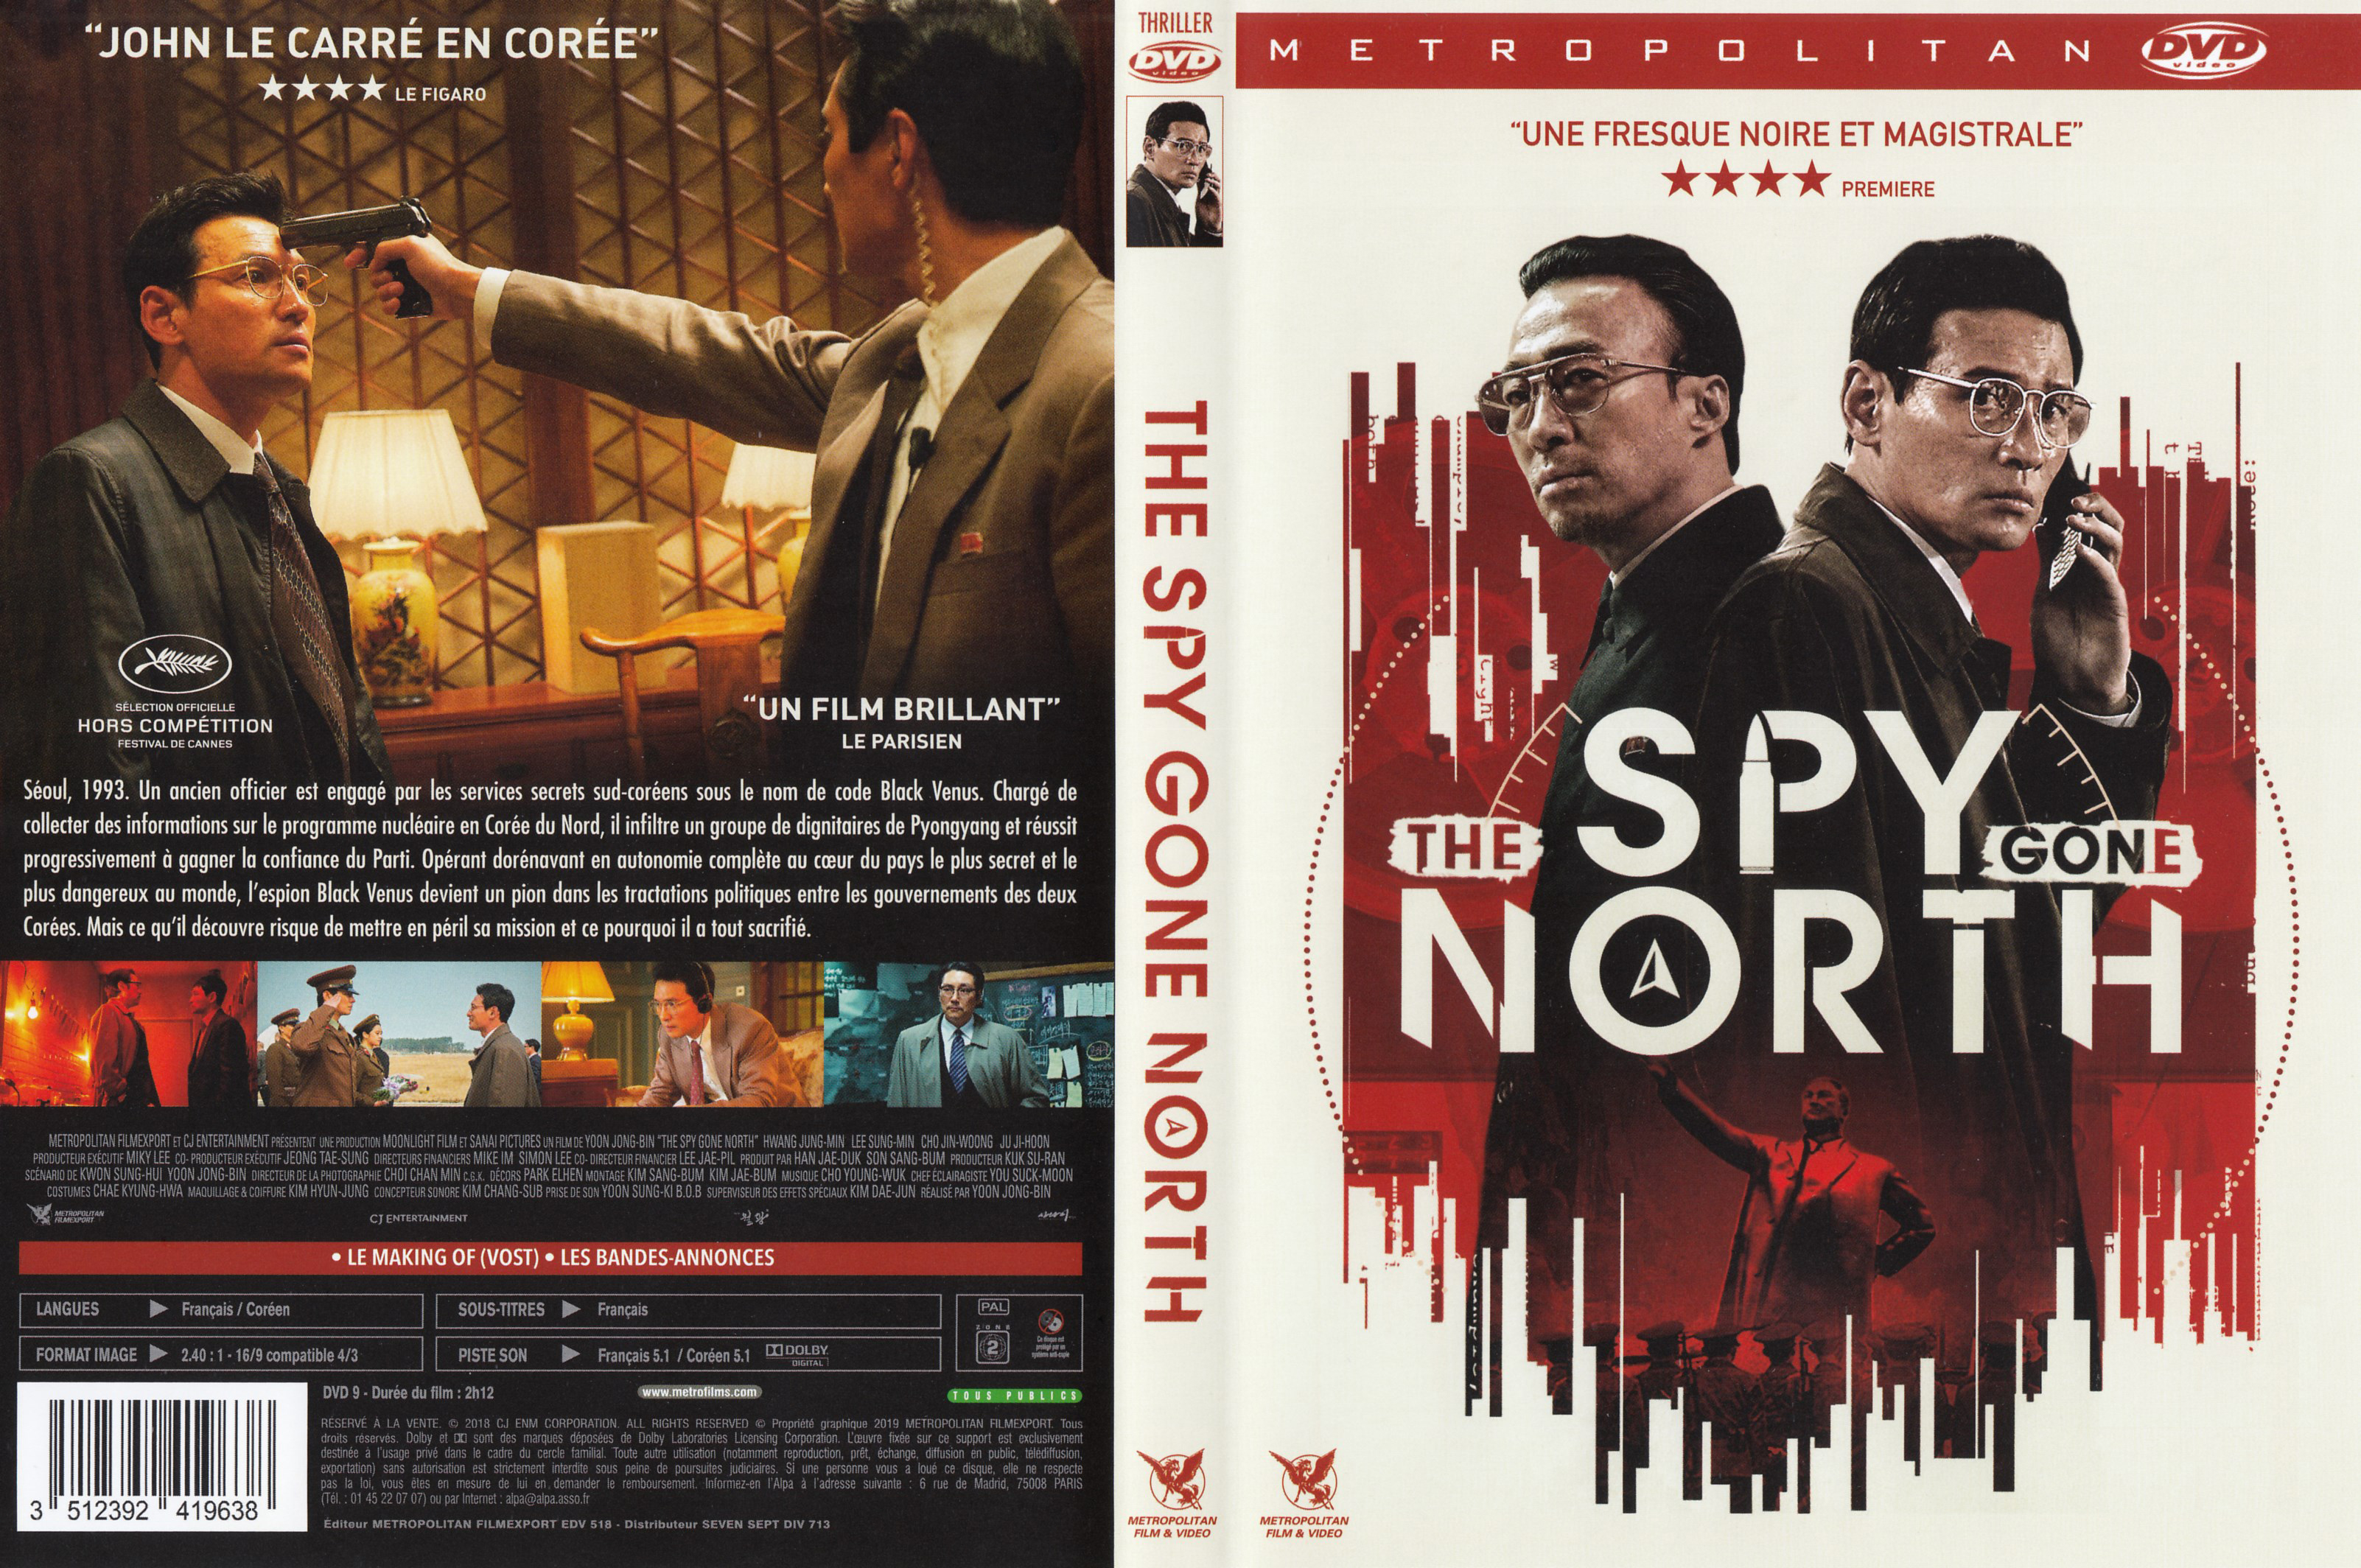 Jaquette DVD The spy gone north